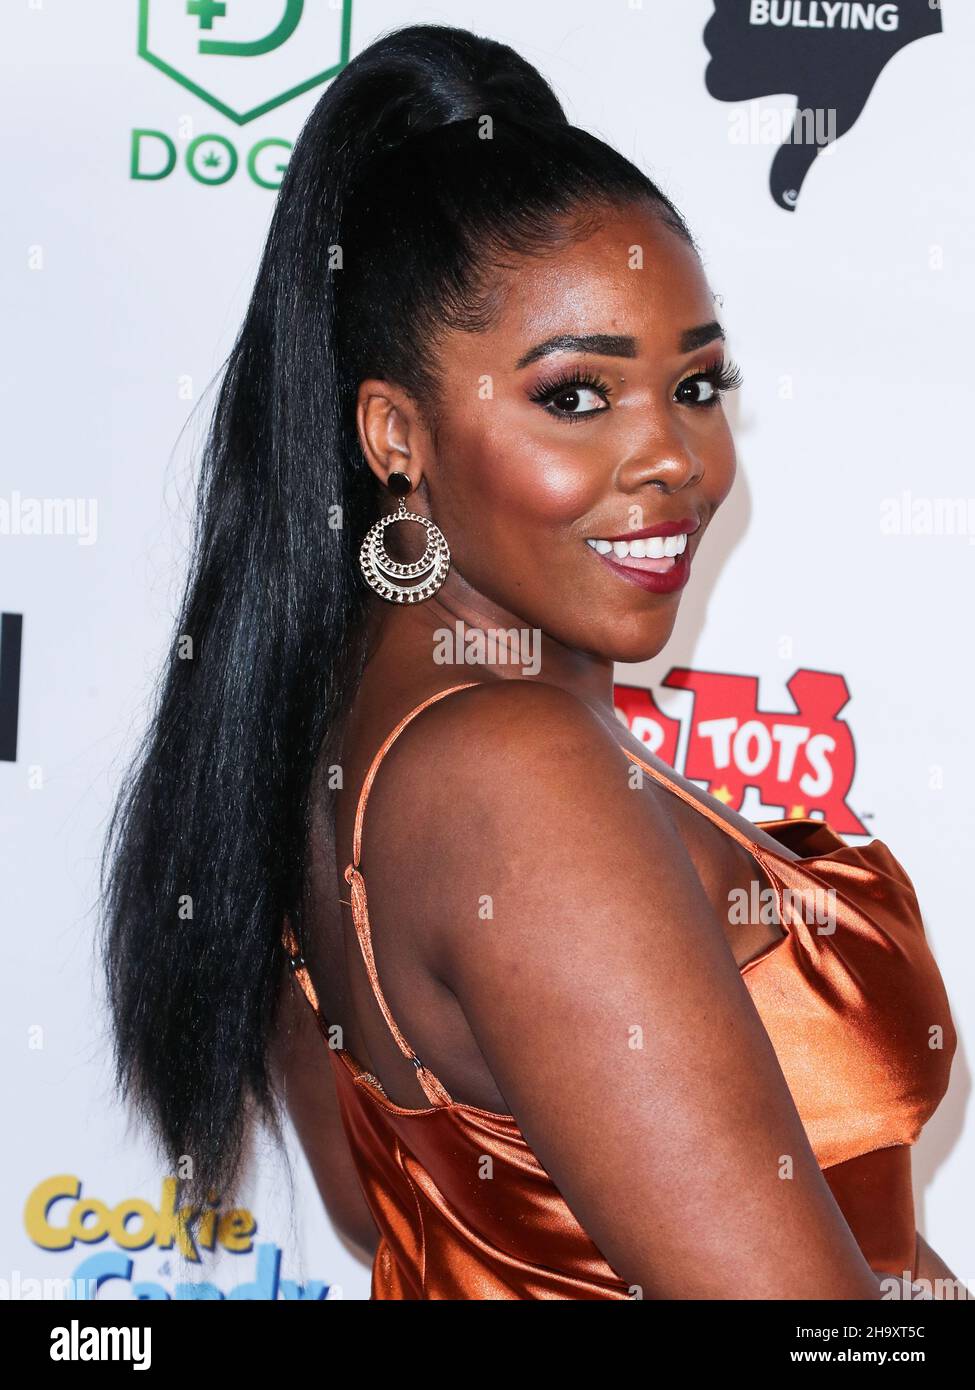 Hollywood, United States. 08th Dec, 2021. HOLLYWOOD, LOS ANGELES, CALIFORNIA, USA - DECEMBER 08: Television personality Jasmine Goode arrives at Katie Welch And Jordan Kuker's 8th Annual Winter Wonderland Toys for Tots Charity Event presented by SIKI.io, DOGG coin, Candy Pop and Cookie Pop and Tito's Vodka held at Yamashiro Hollywood on December 8, 2021 in Hollywood, Los Angeles, California, United States. (Photo by Xavier Collin/Image Press Agency/Sipa USA) Credit: Sipa USA/Alamy Live News Stock Photo